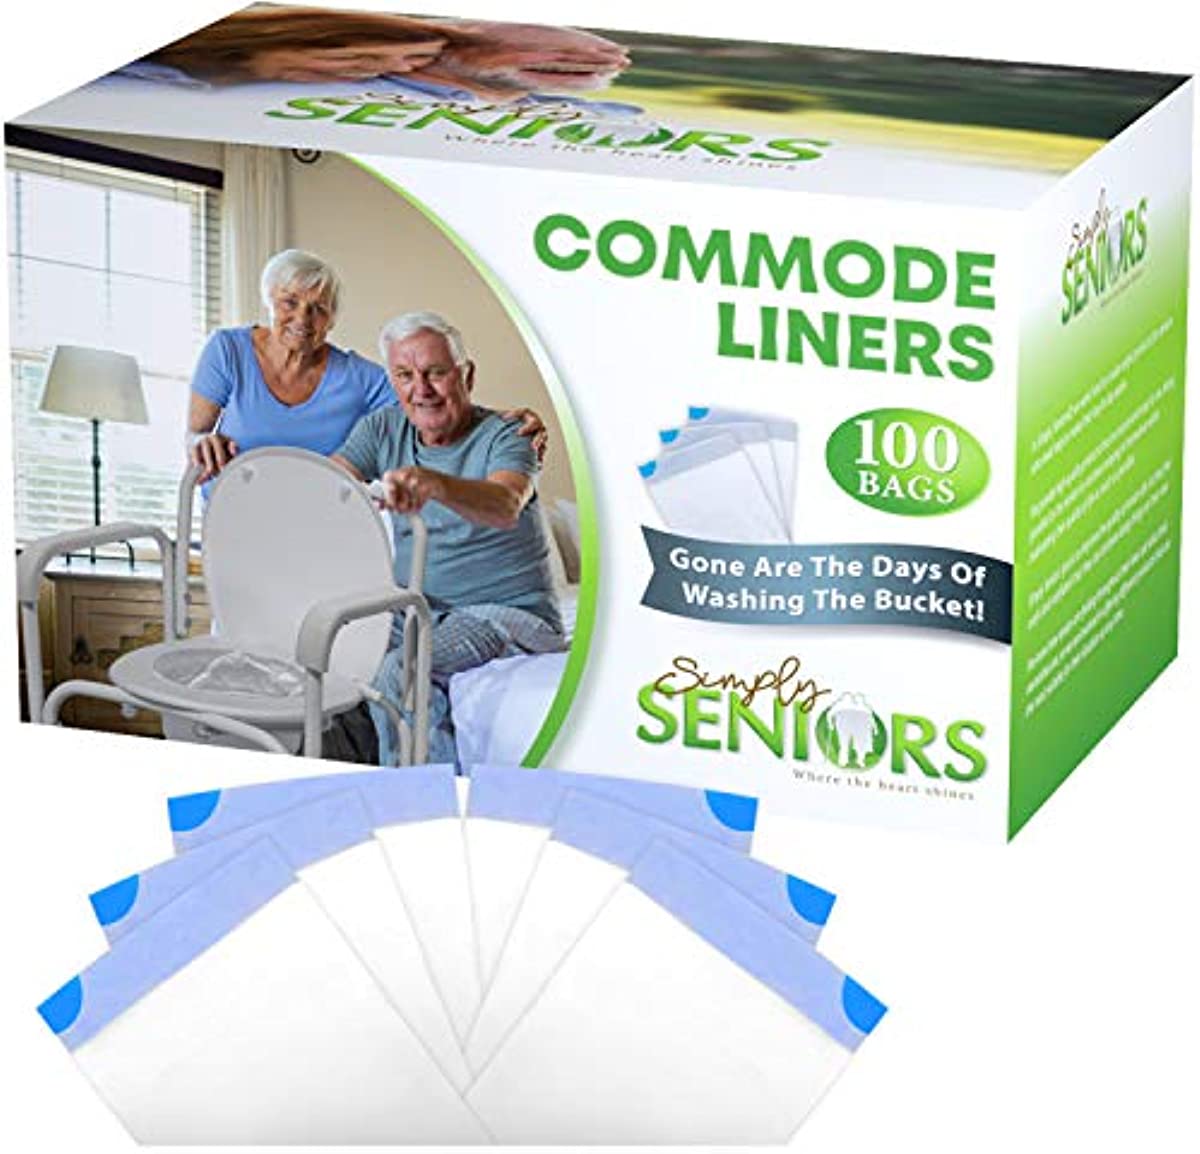 Commode Liners - 100 Strong Portable Toilet Bags - Easy To Use Bedside Commode Liners Disposable - Toilet Liners That Support Dignity of Seniors & Disabled - No More Buckets to Wash - NO Absorbent Pad